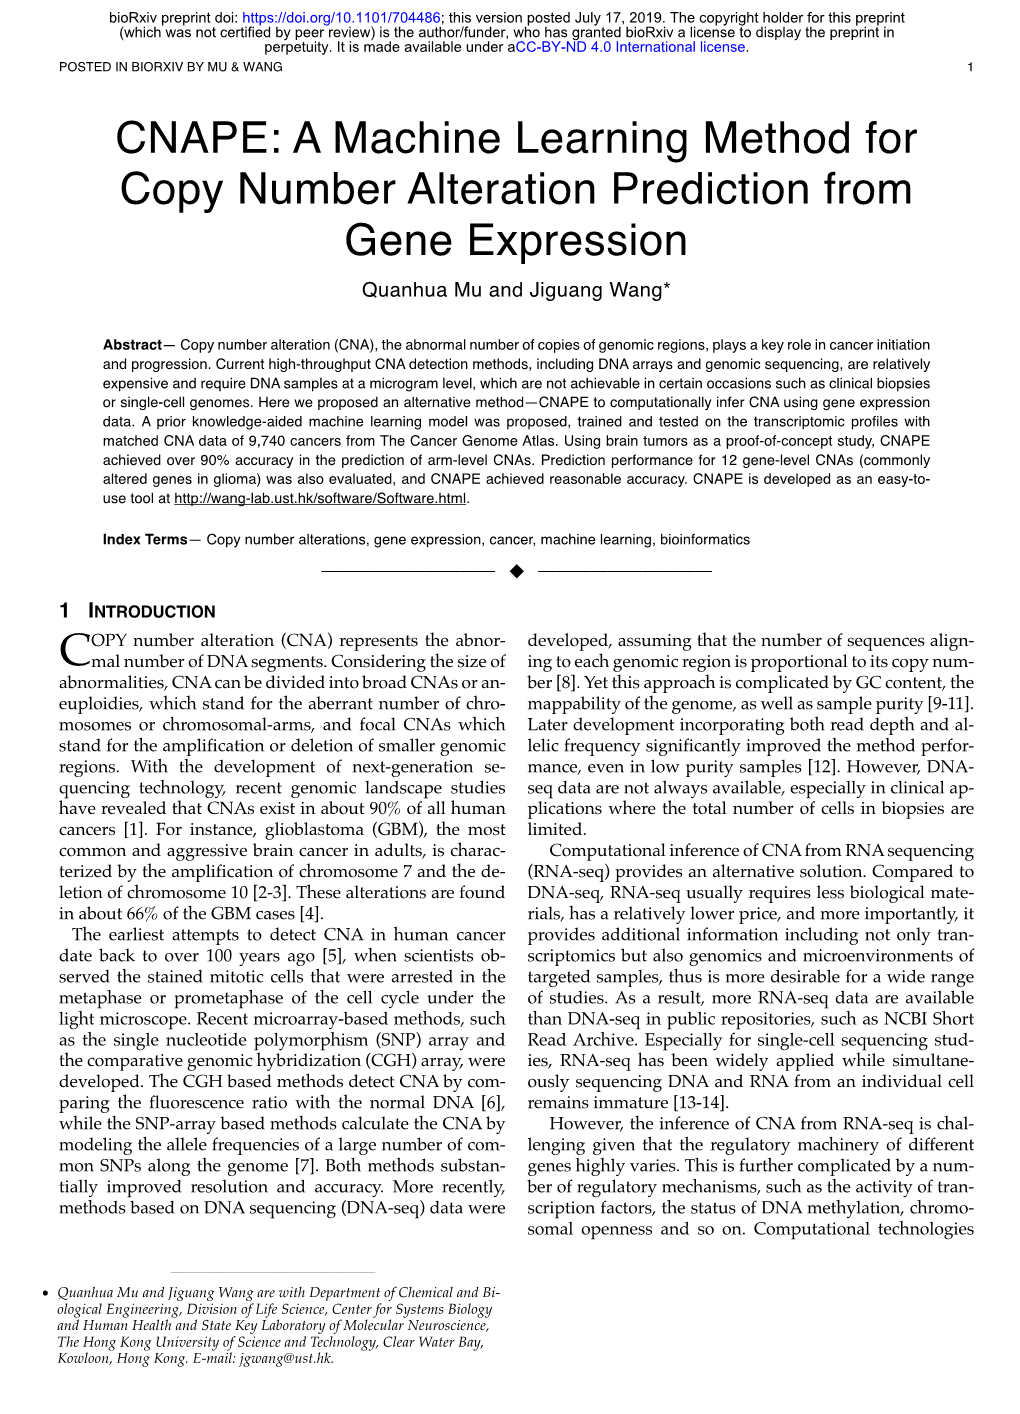 CNAPE: a Machine Learning Method for Copy Number Alteration Prediction from Gene Expression Quanhua Mu and Jiguang Wang*